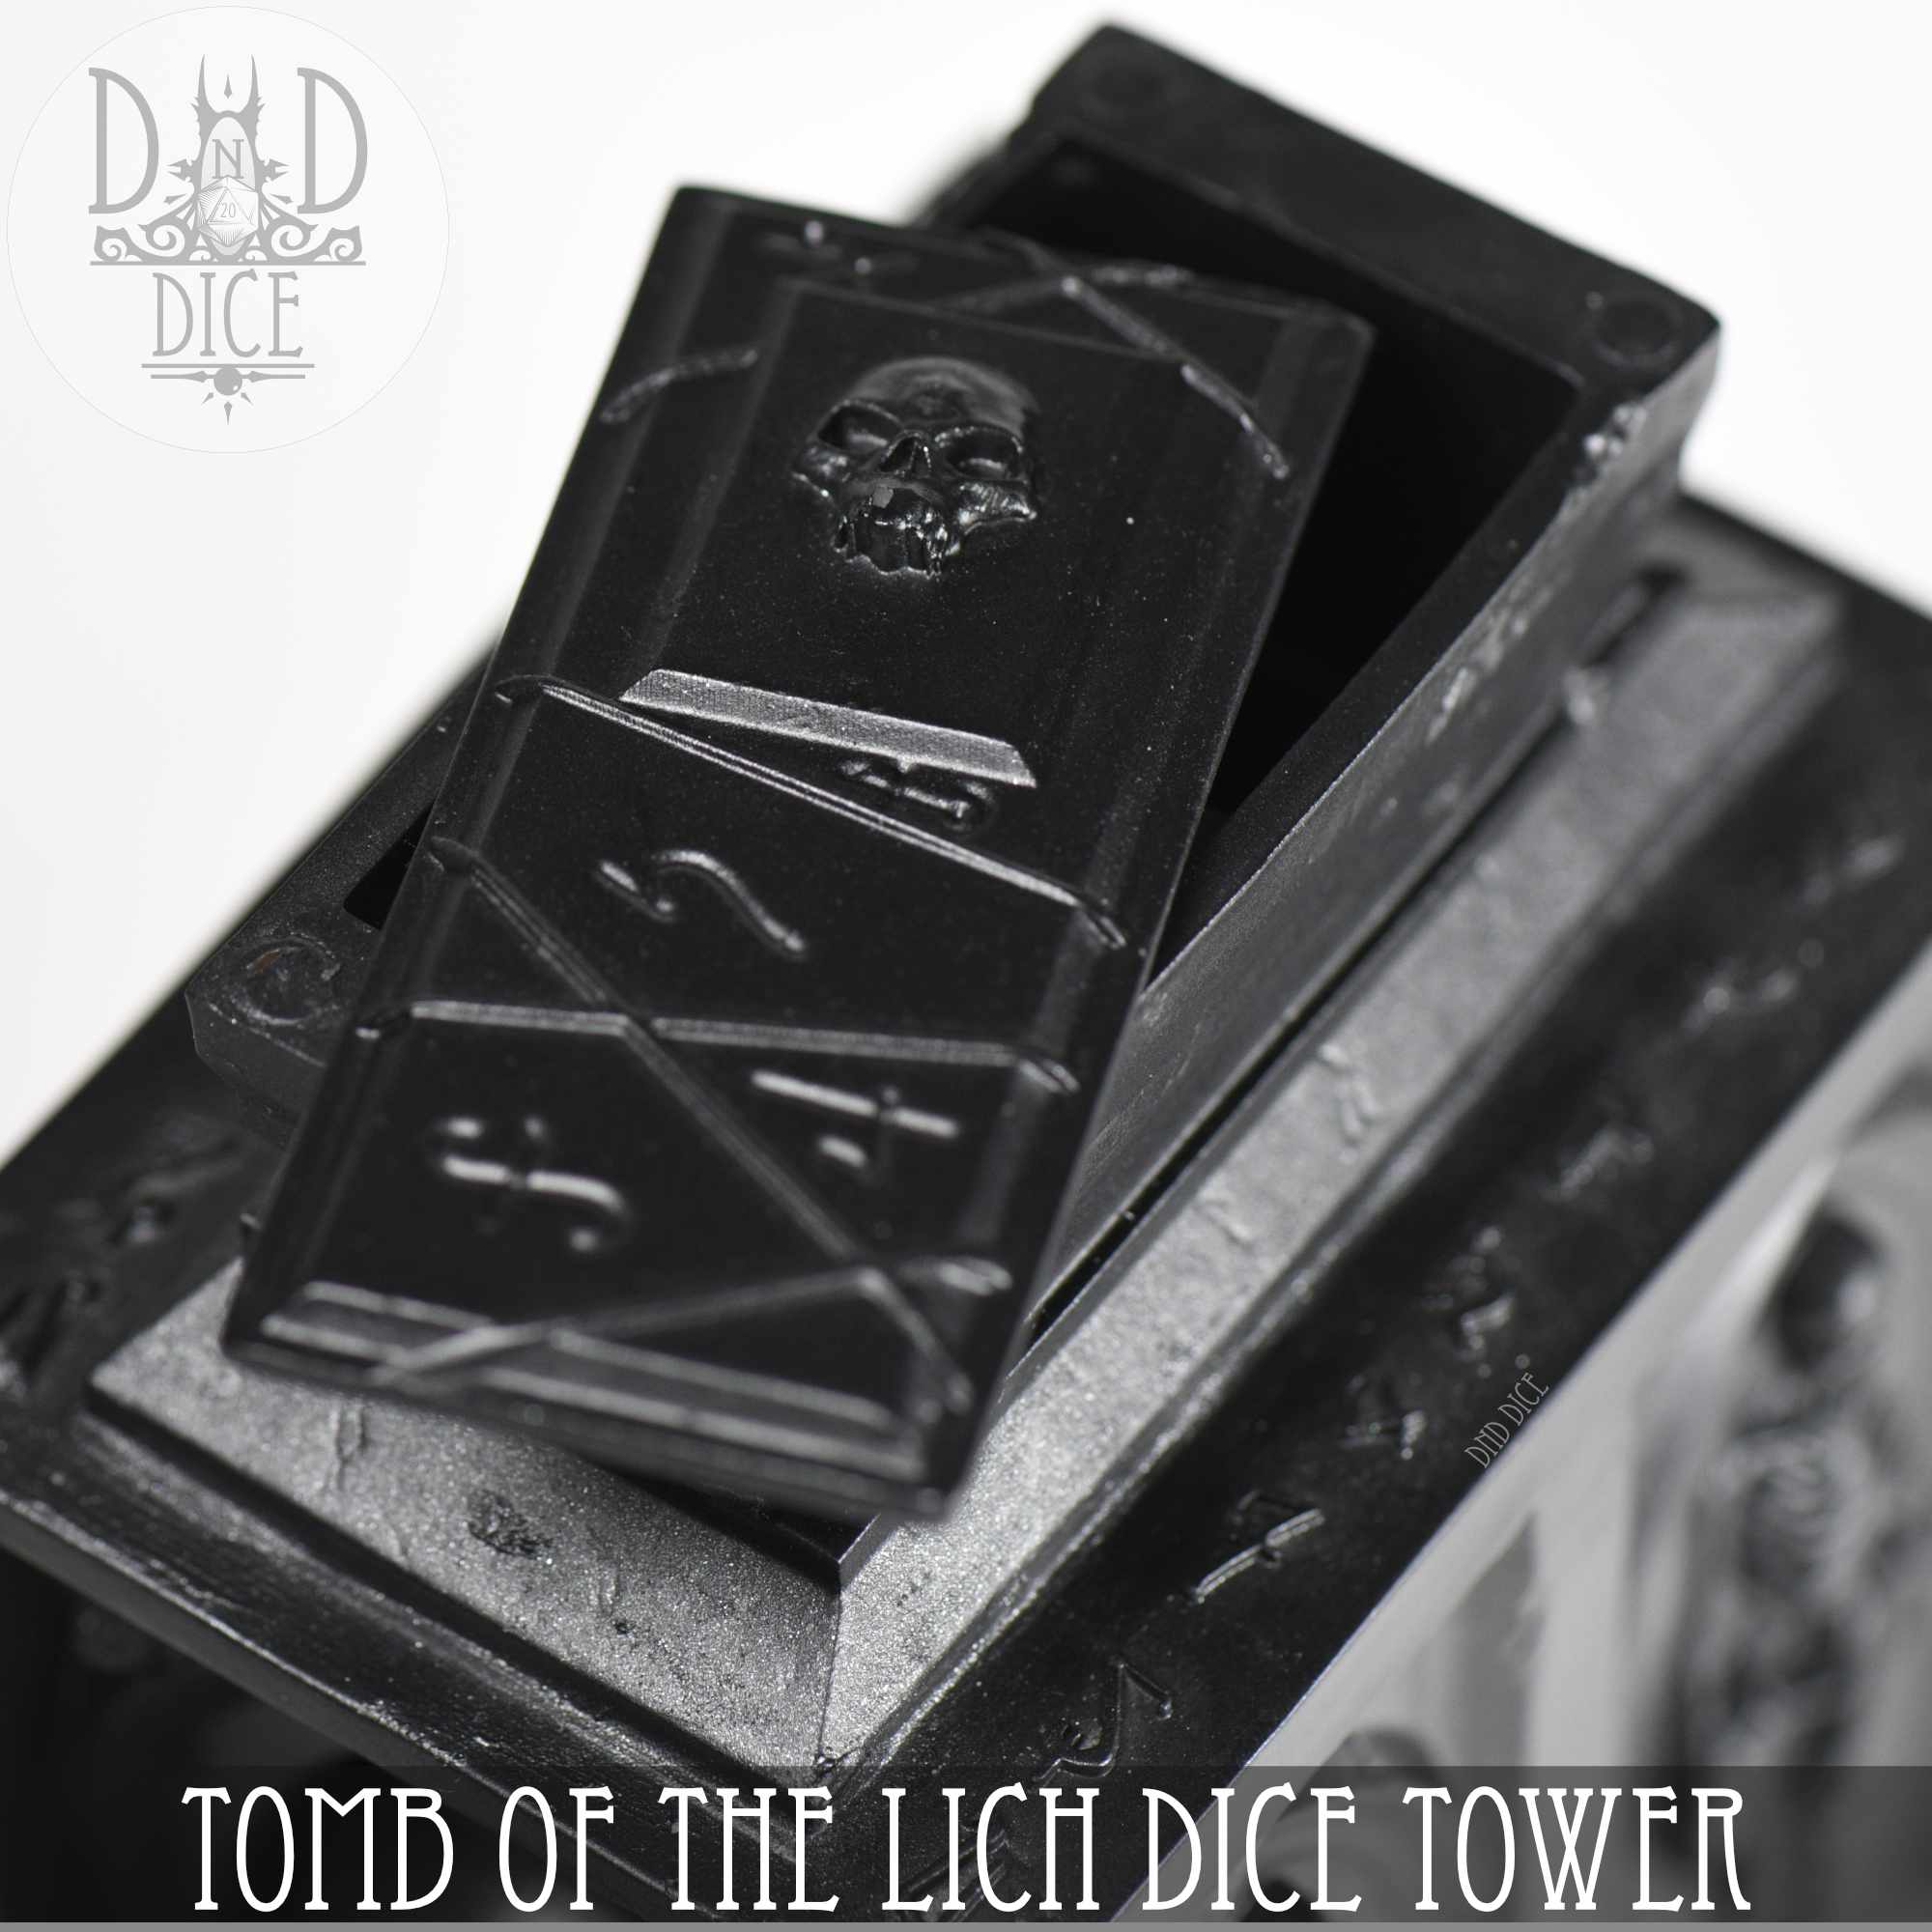 Tomb of the Lich Dice Tower